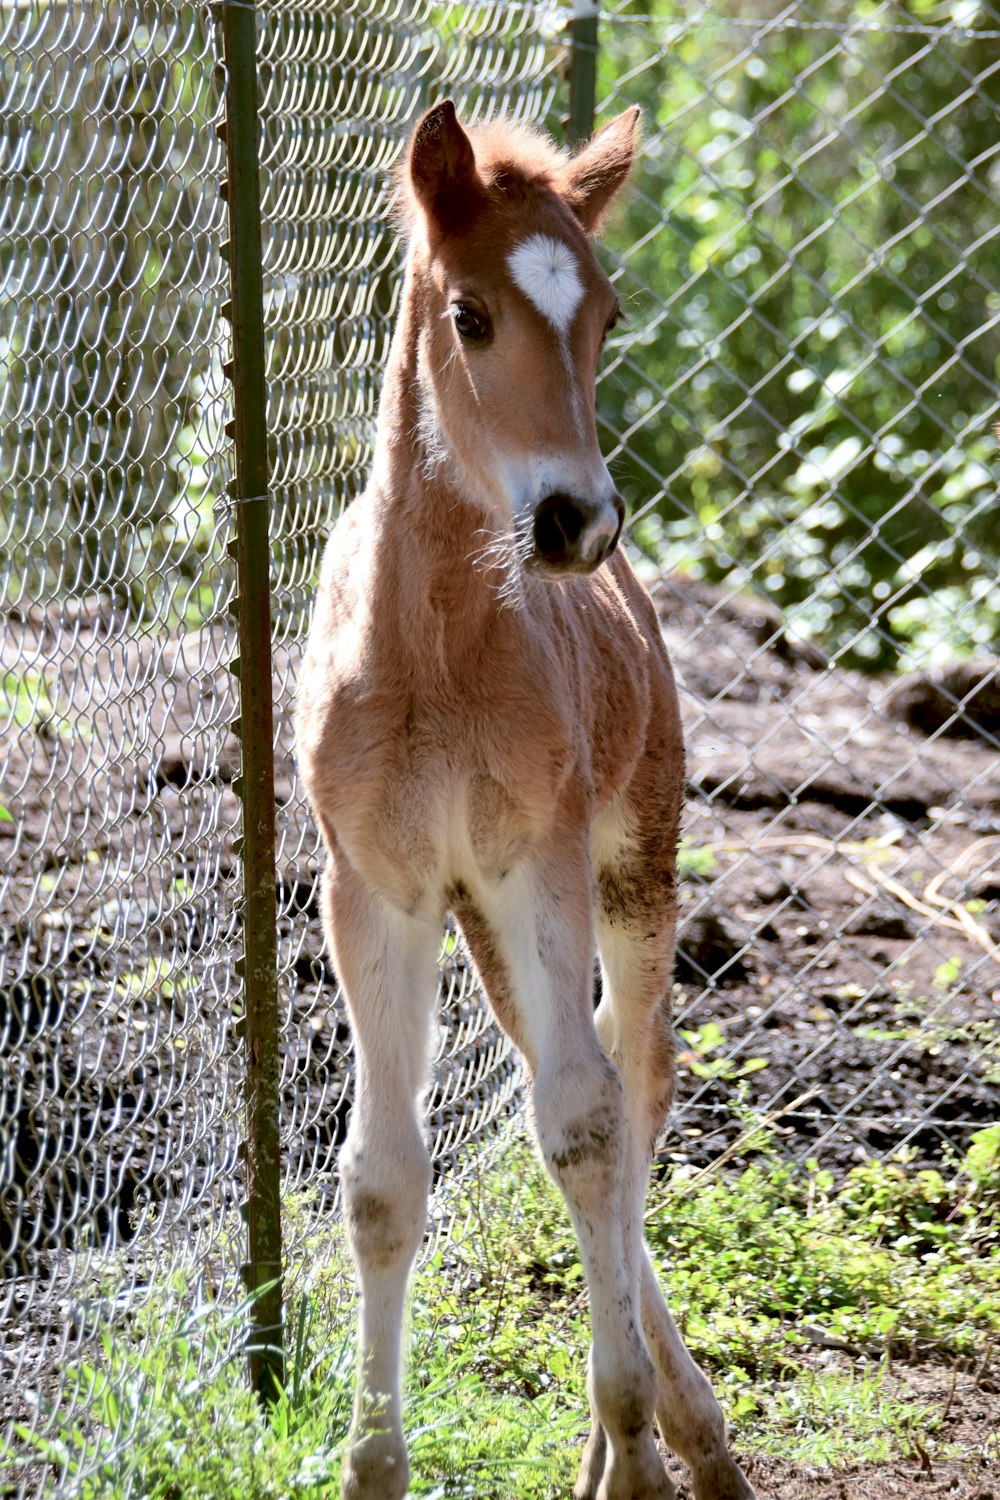 a baby horse standing next to a chain link fence